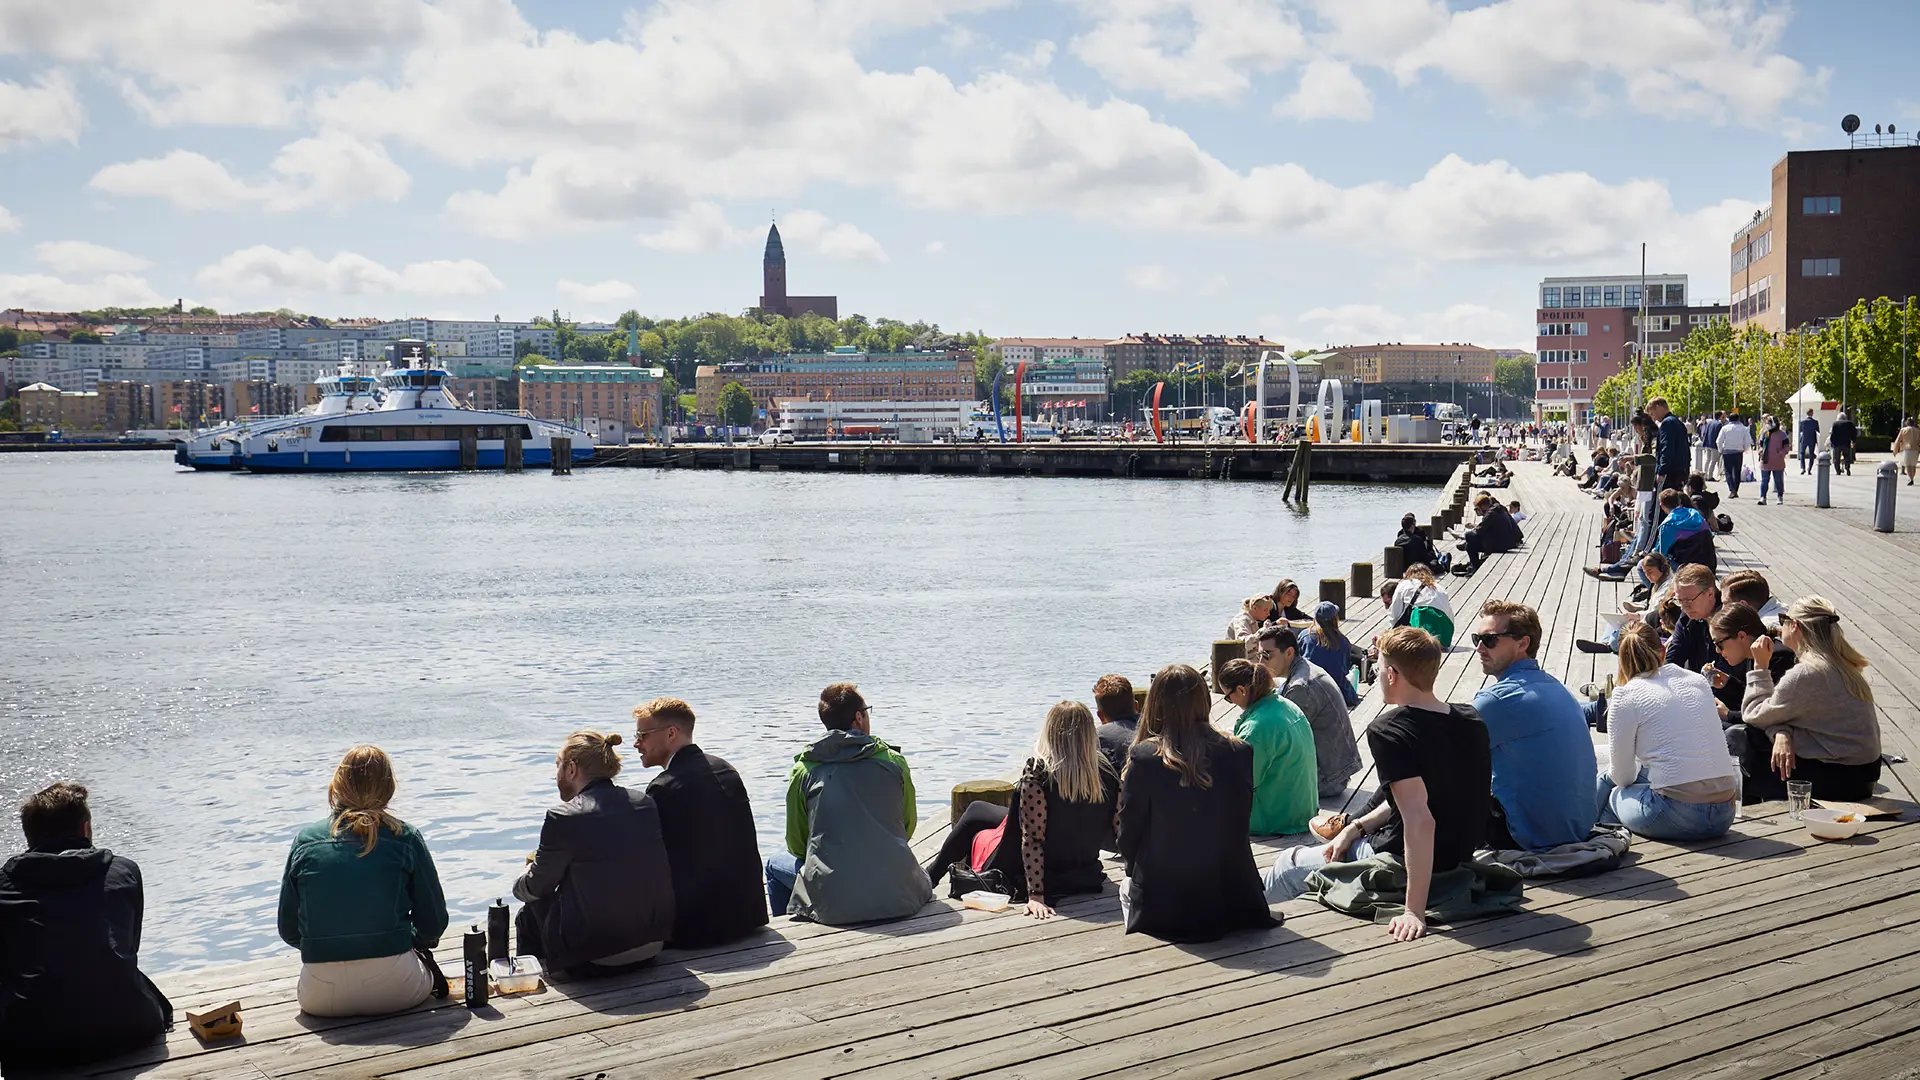 Students sitting on wooden seating area at Lindholmen